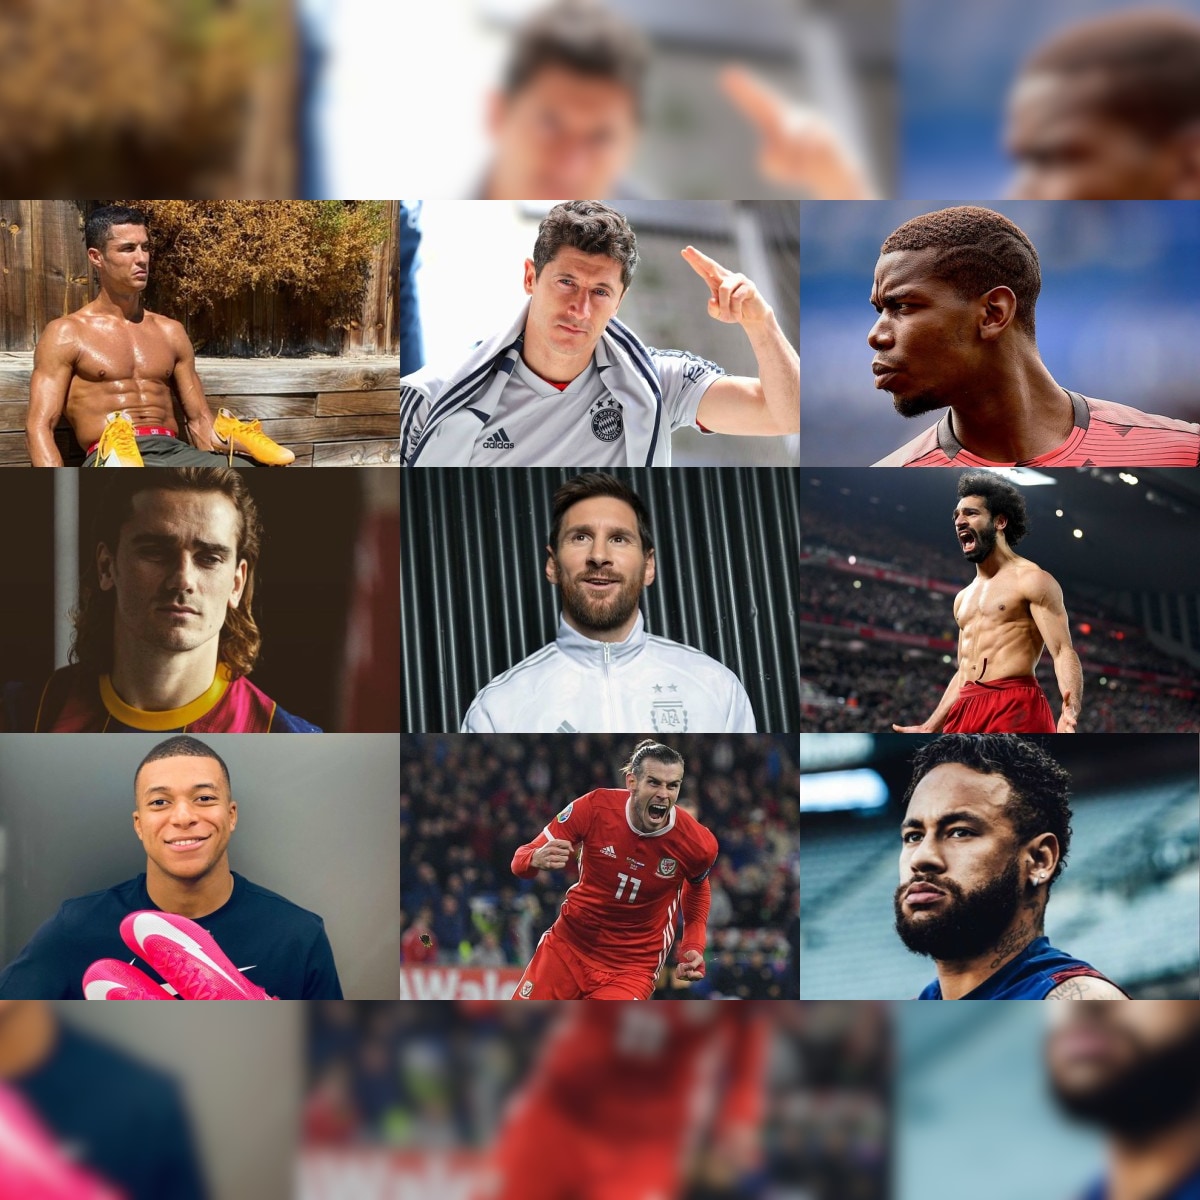 Top 10 Richest Footballers in the World 2020 - In Pictures